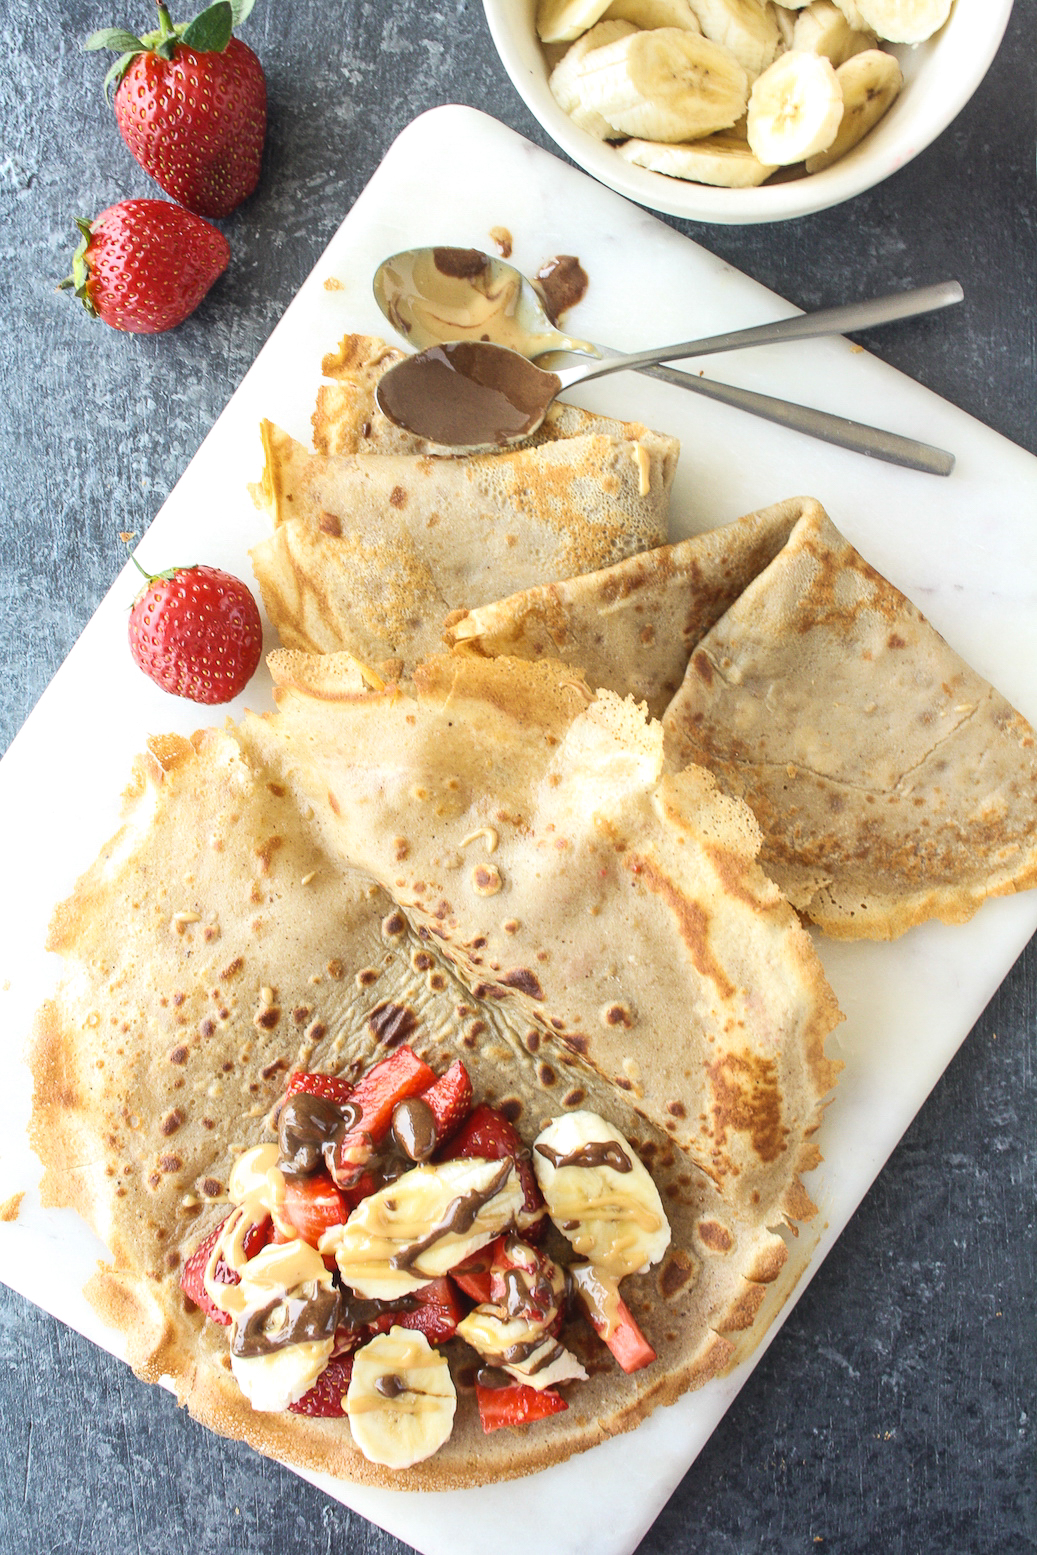 Super quick buckwheat crepes, easily made vegan, and filled with fresh fruit and nut butters!